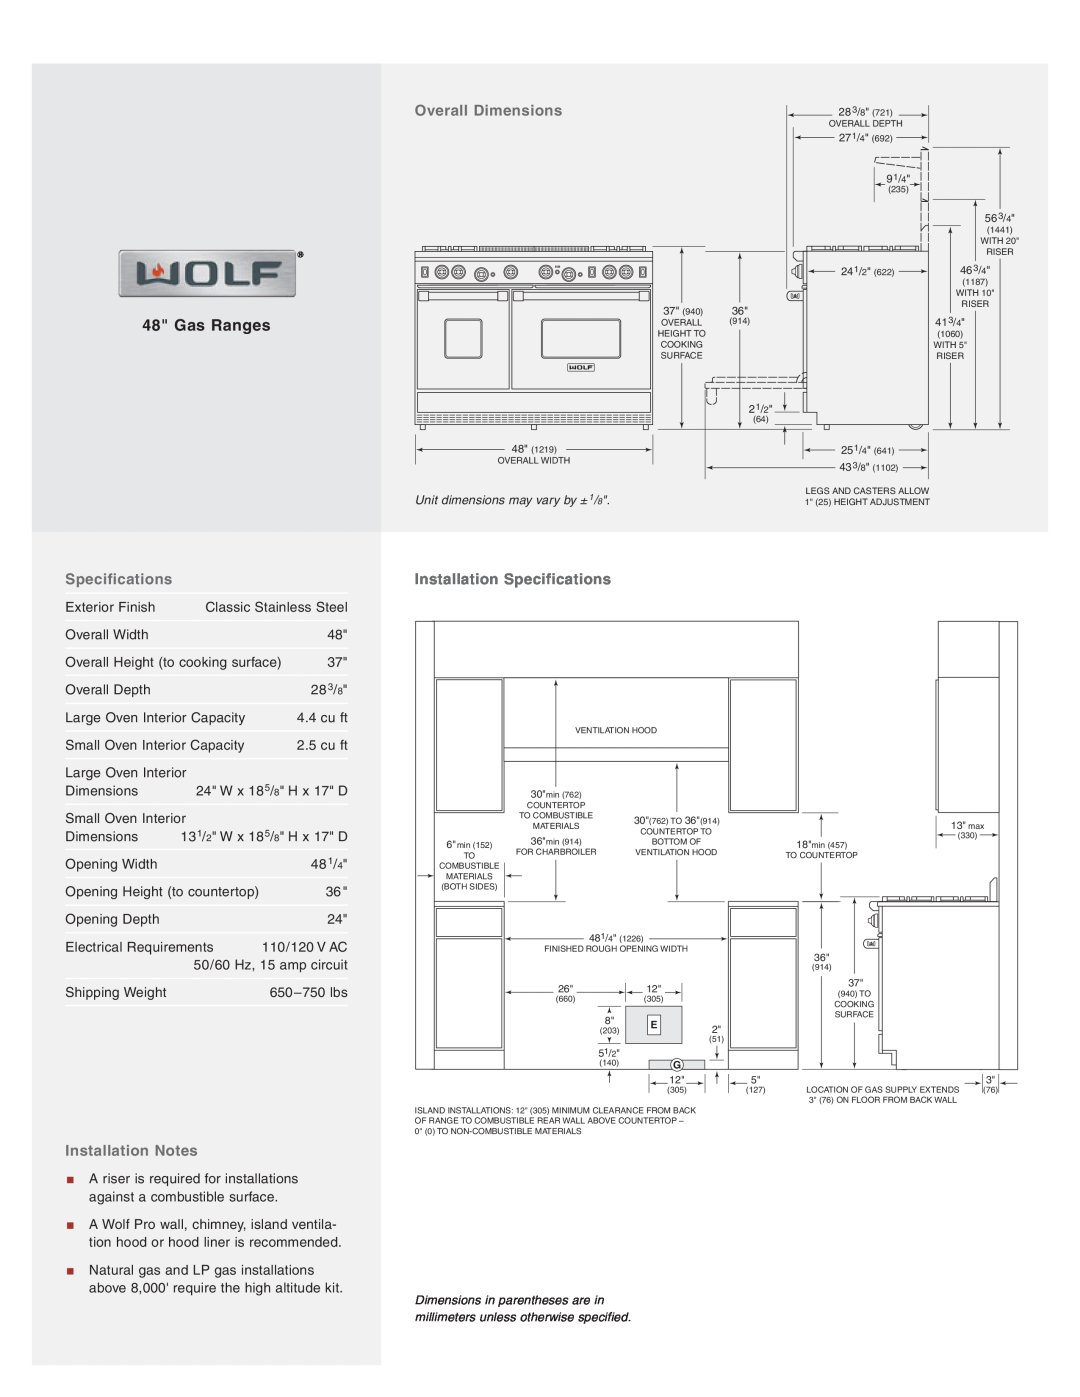 Wolf Appliance Company R484F, R486C Overall Dimensions, Installation Notes, Installation Specifications, Gas Ranges 